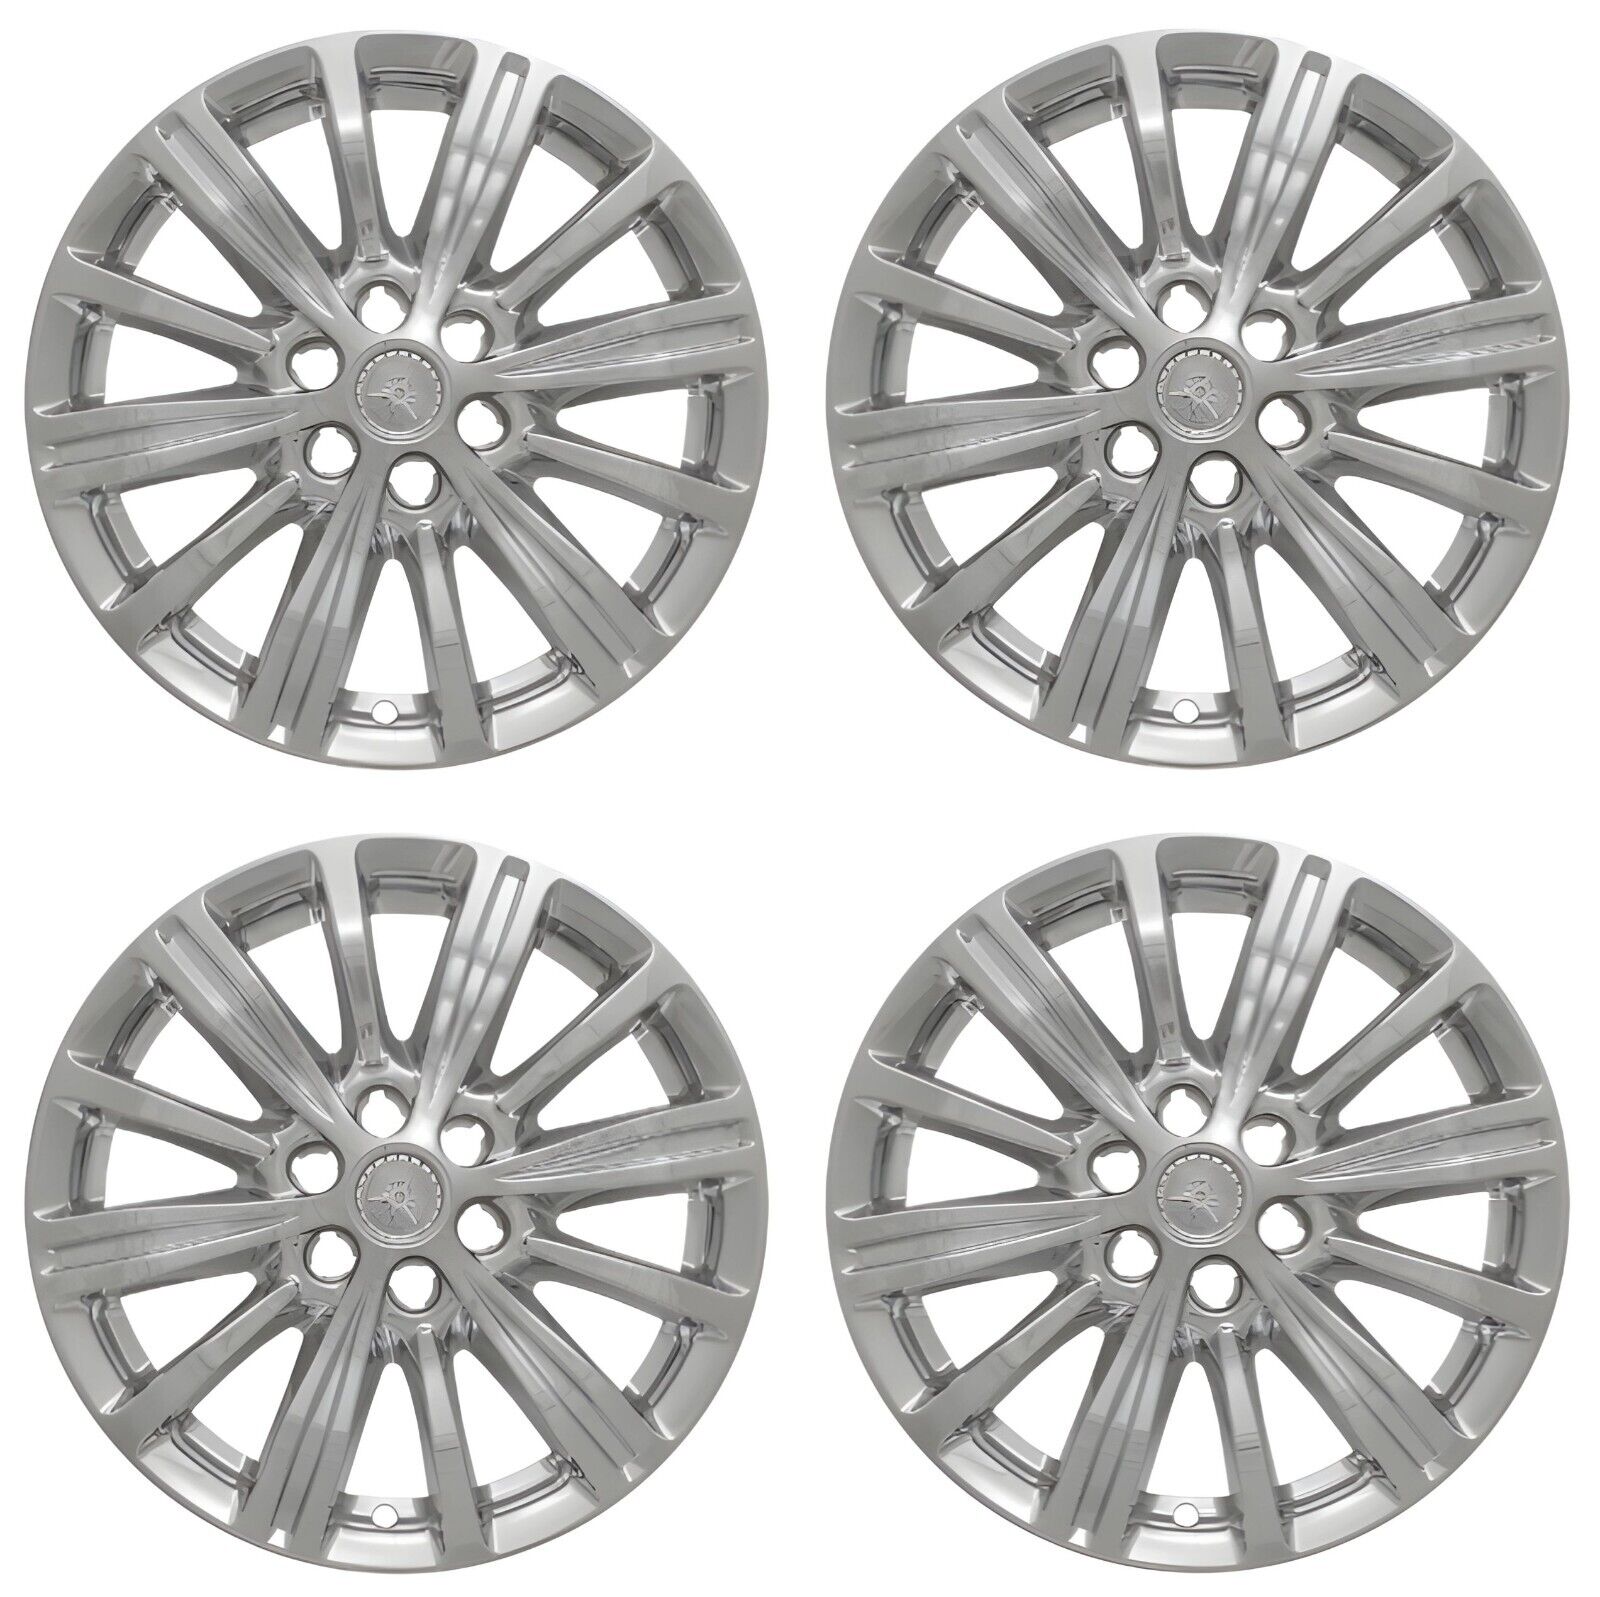 4 Pack Chrome 18 inch ABS Impostor Wheel Skins for 17-19 Cadillac XT5 Rim Covers